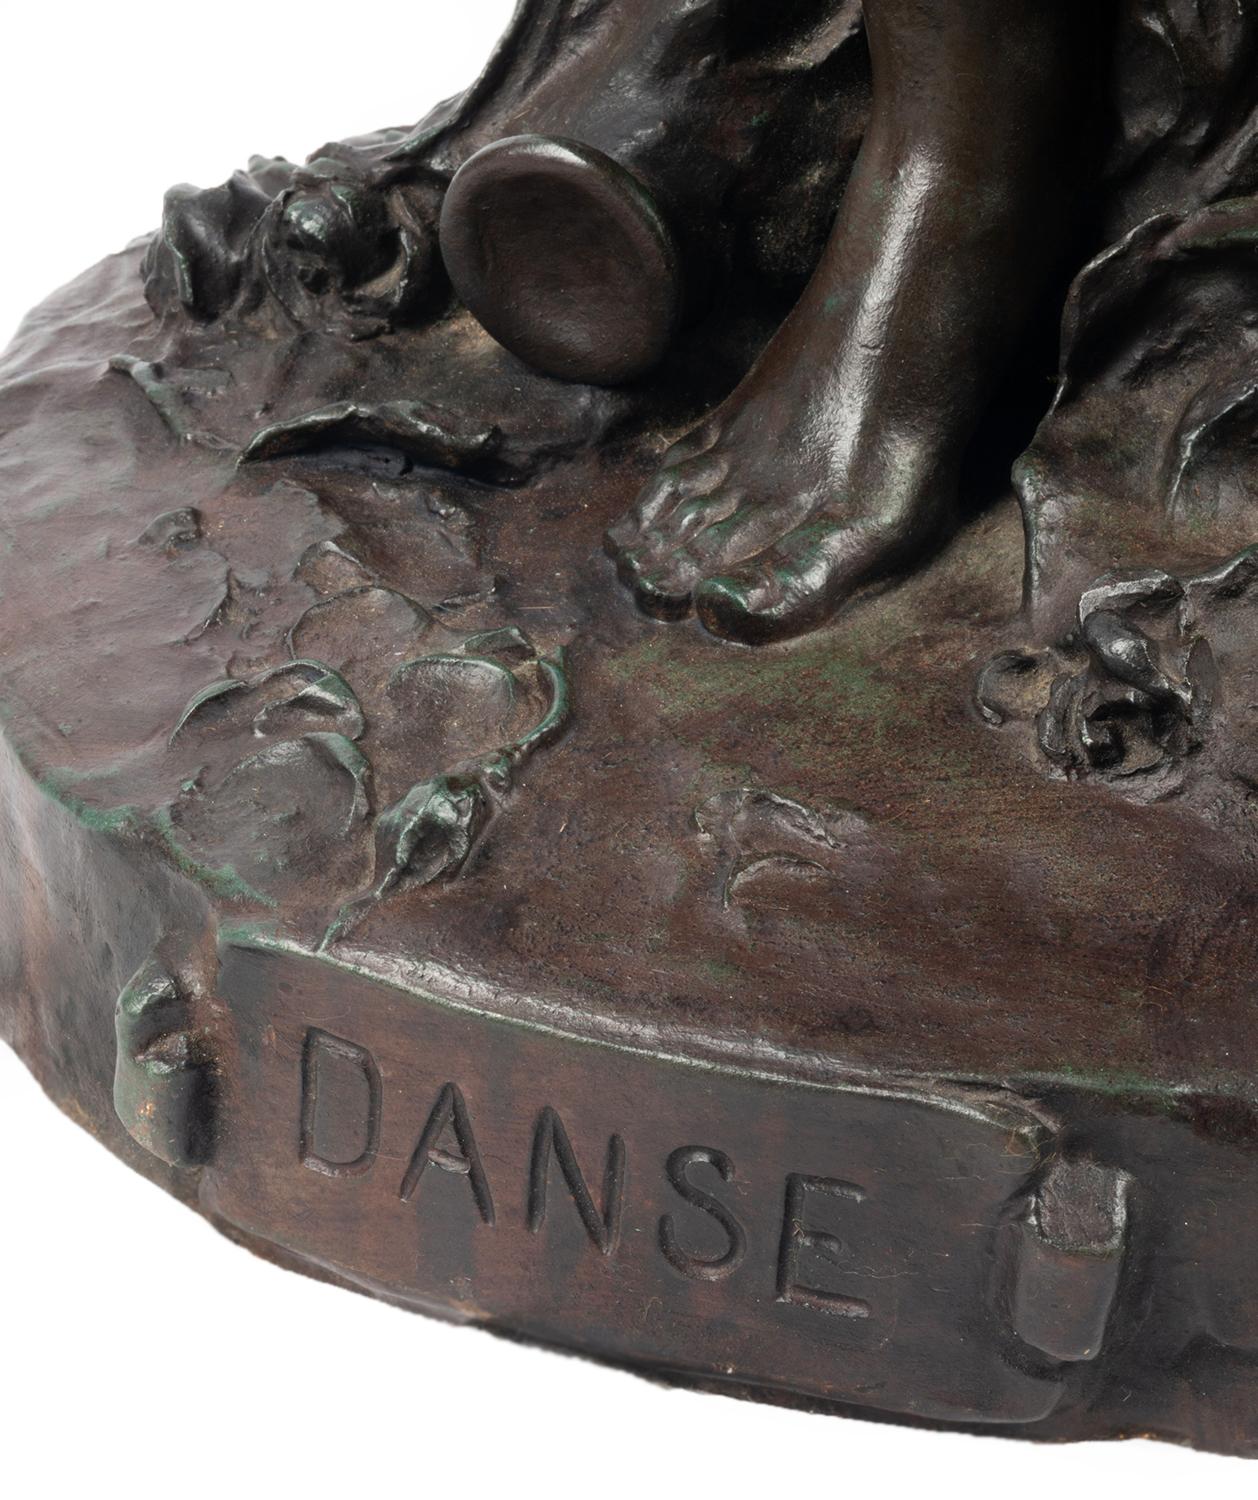 A wonderful 19th Century bronze statue depicting Music and Dance, with two classical maidens and a child dancing.
Signed and stamped;
JEAN-BAPTISTE GERMAIN (FRENCH, 1841-1910)
Susse foundry mark 'Fonte sur Platre/ Susse Fres Edts